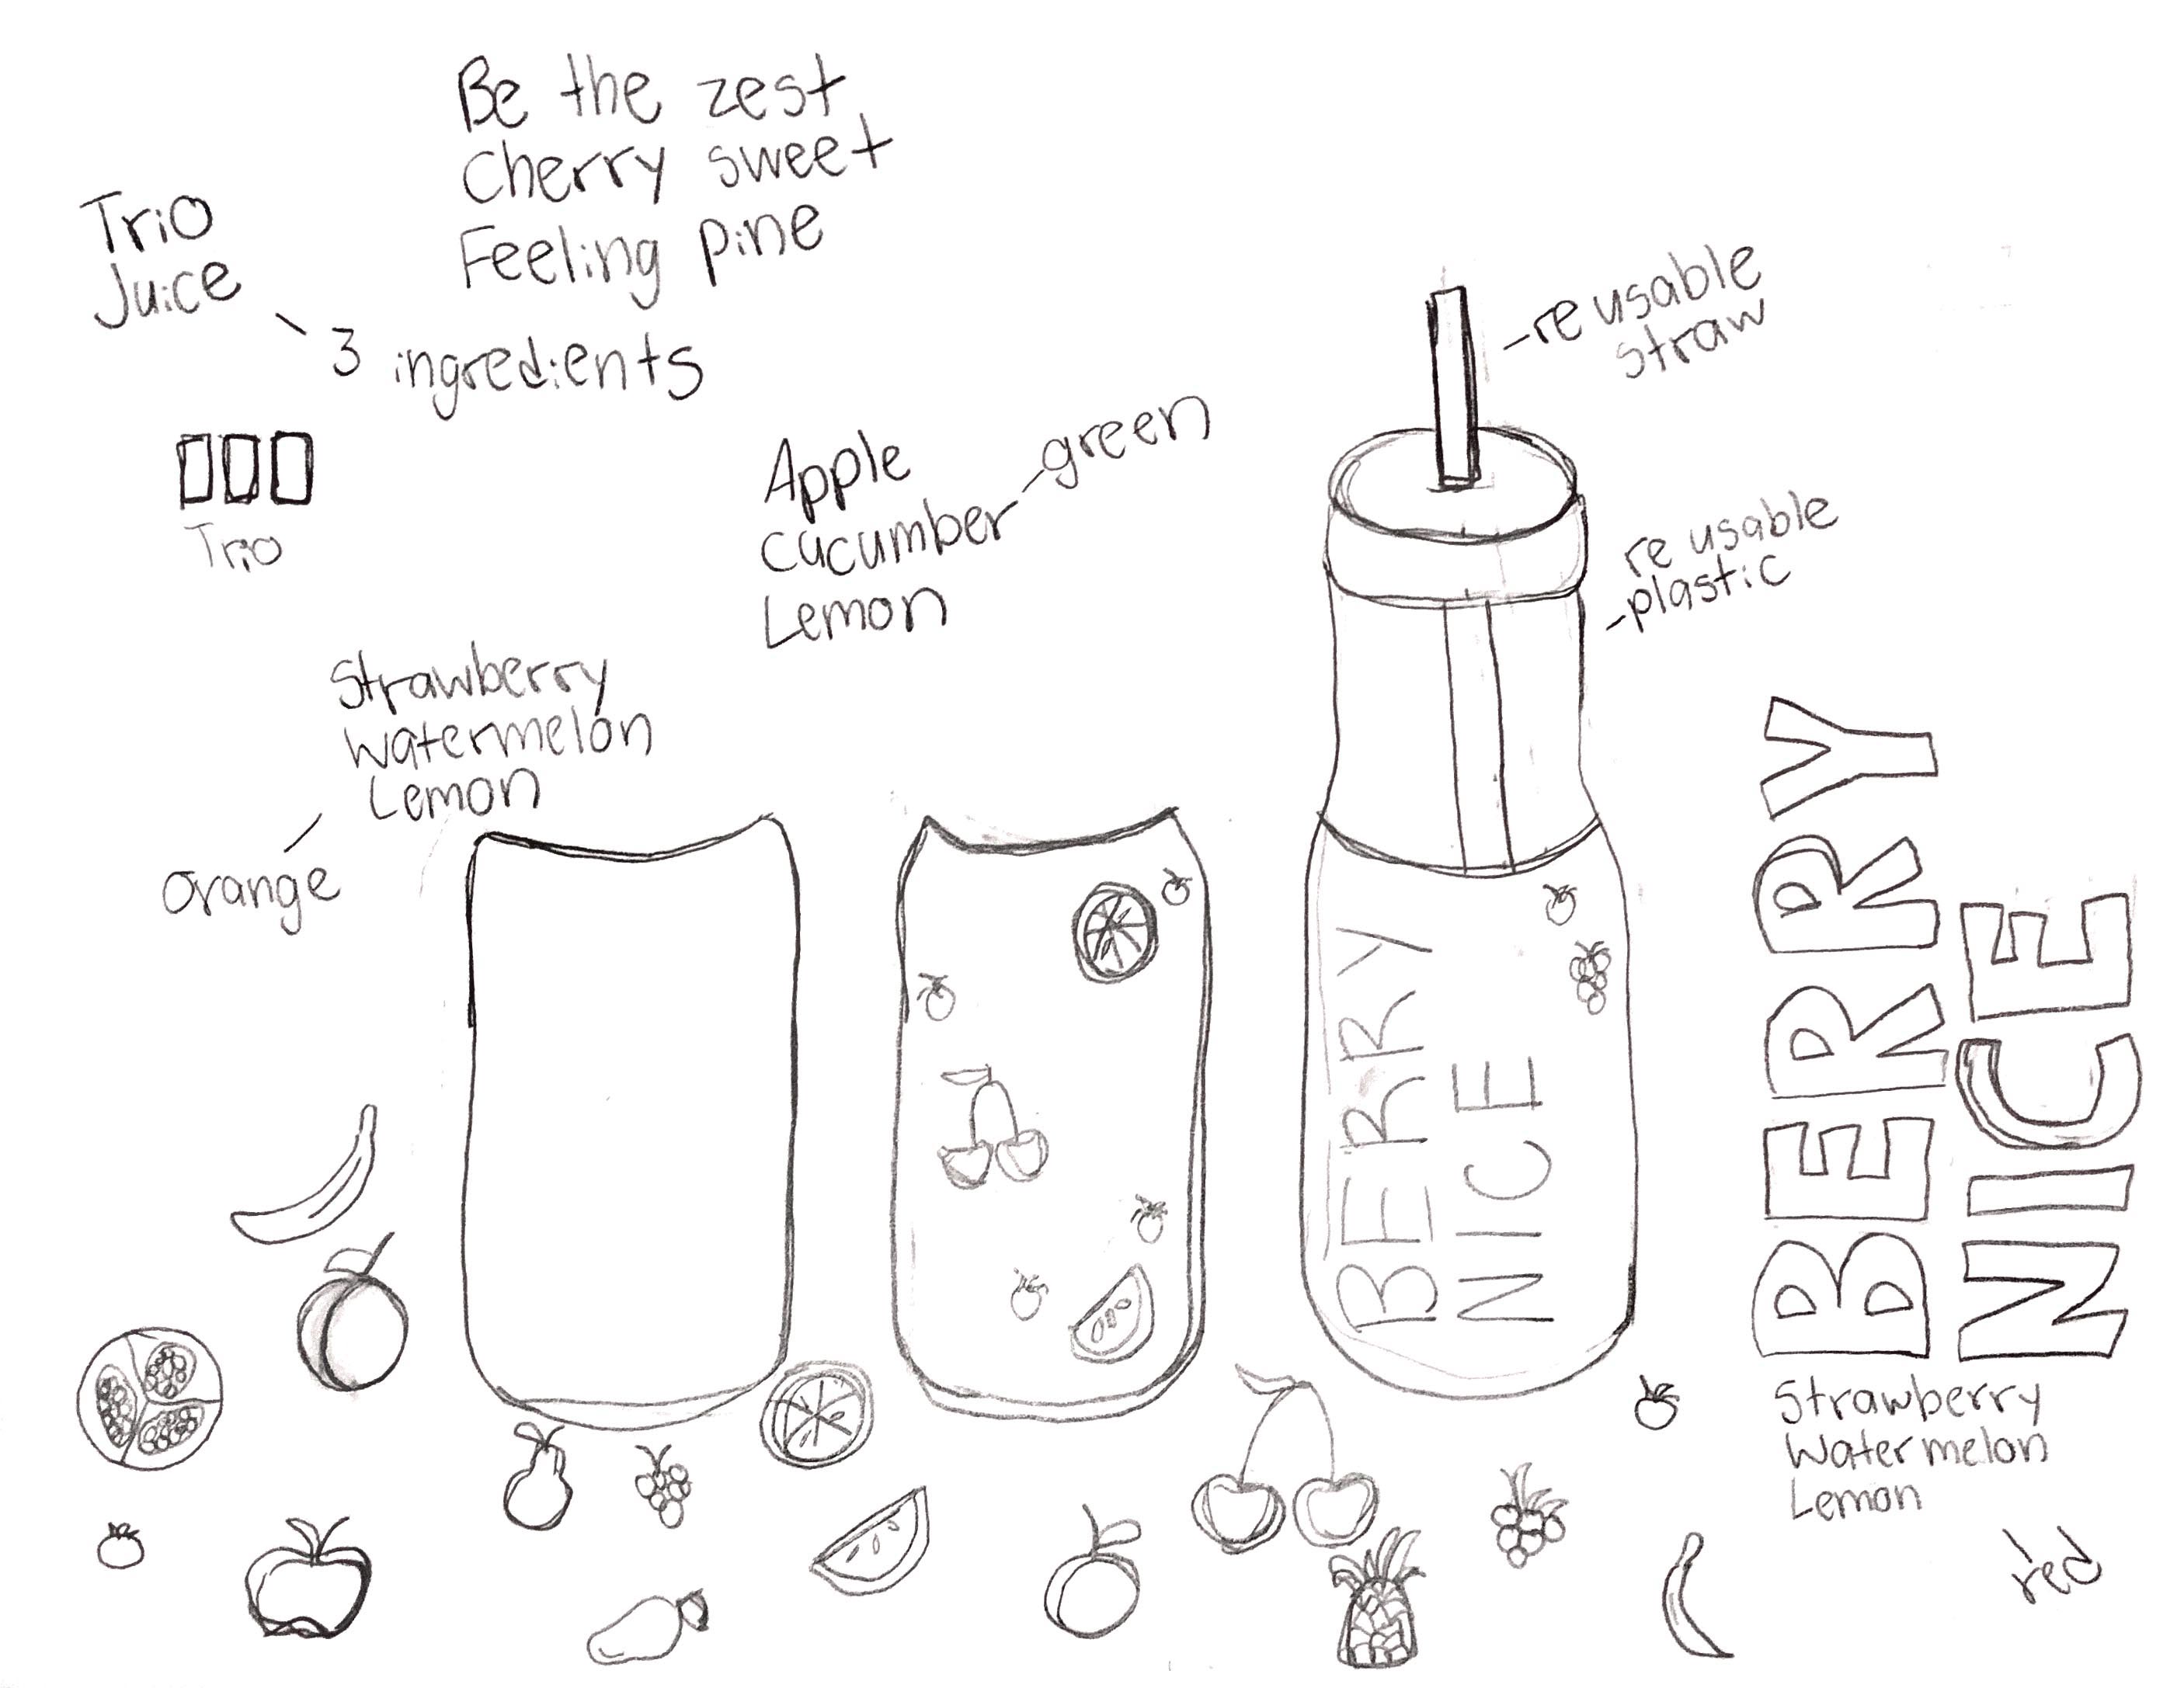 Rough sketch of the bottles and names of the juice